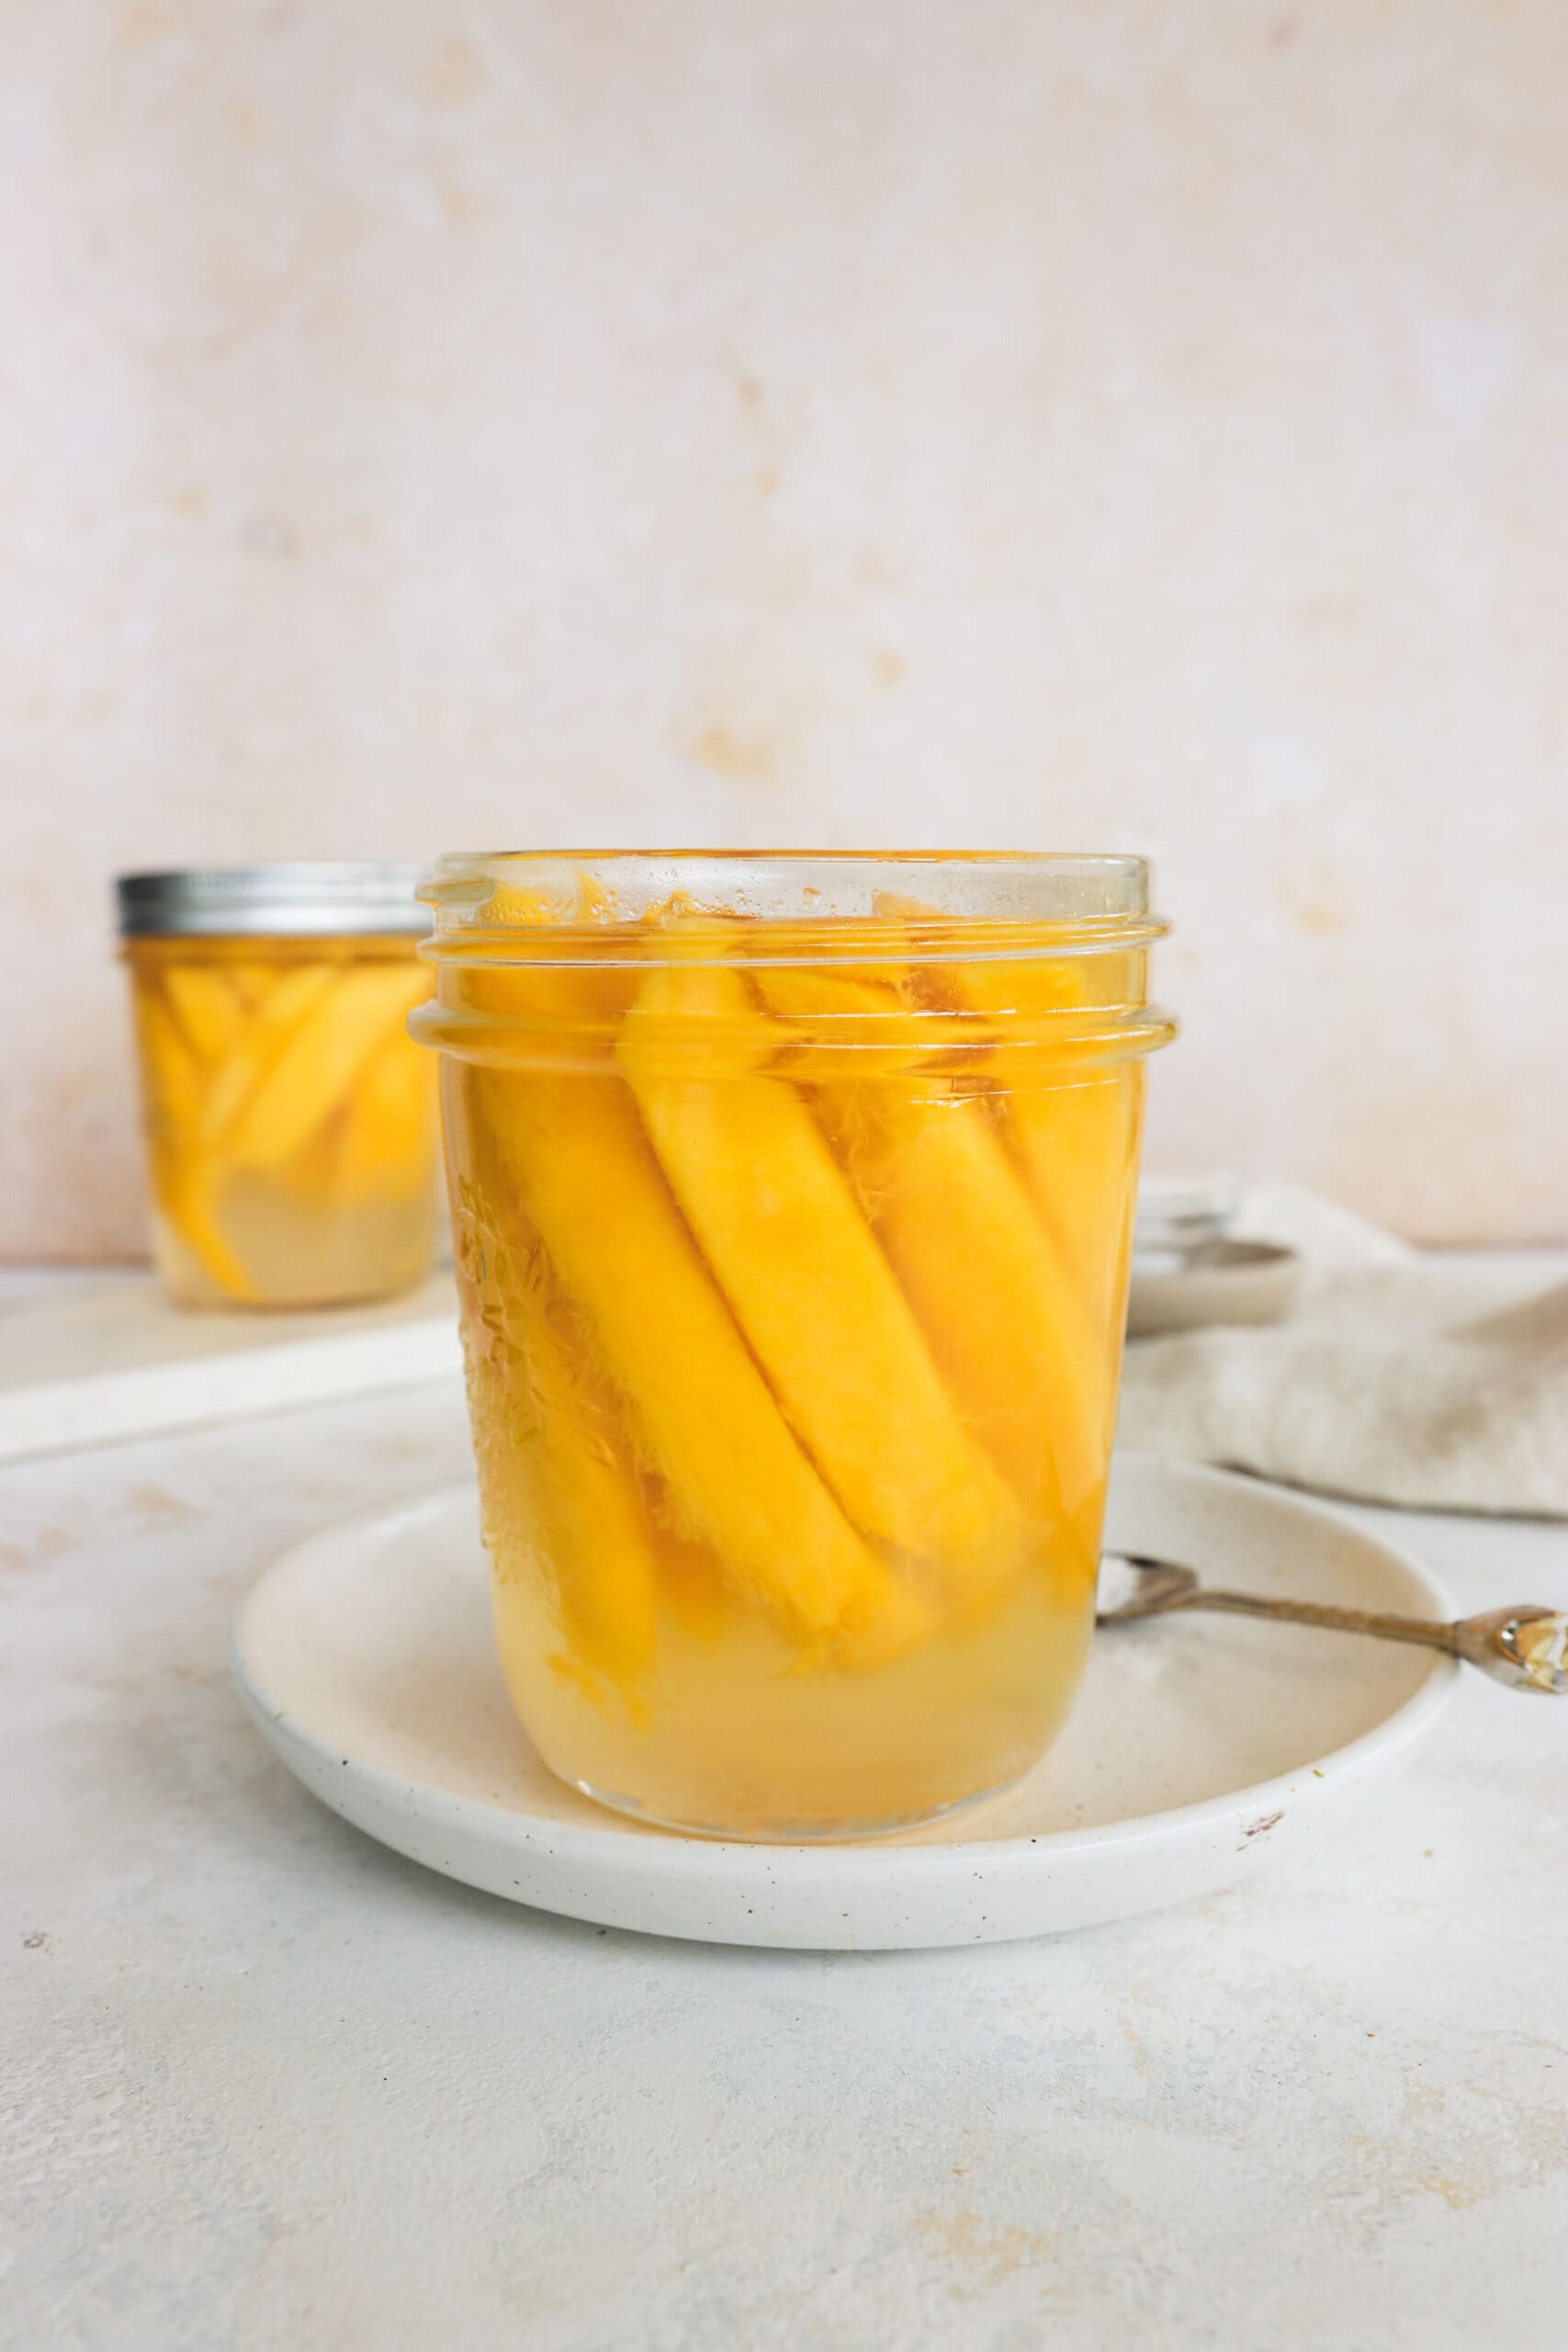 How To Quick-Pickle Mango, Step by Step - Lindsay Pleskot, RD